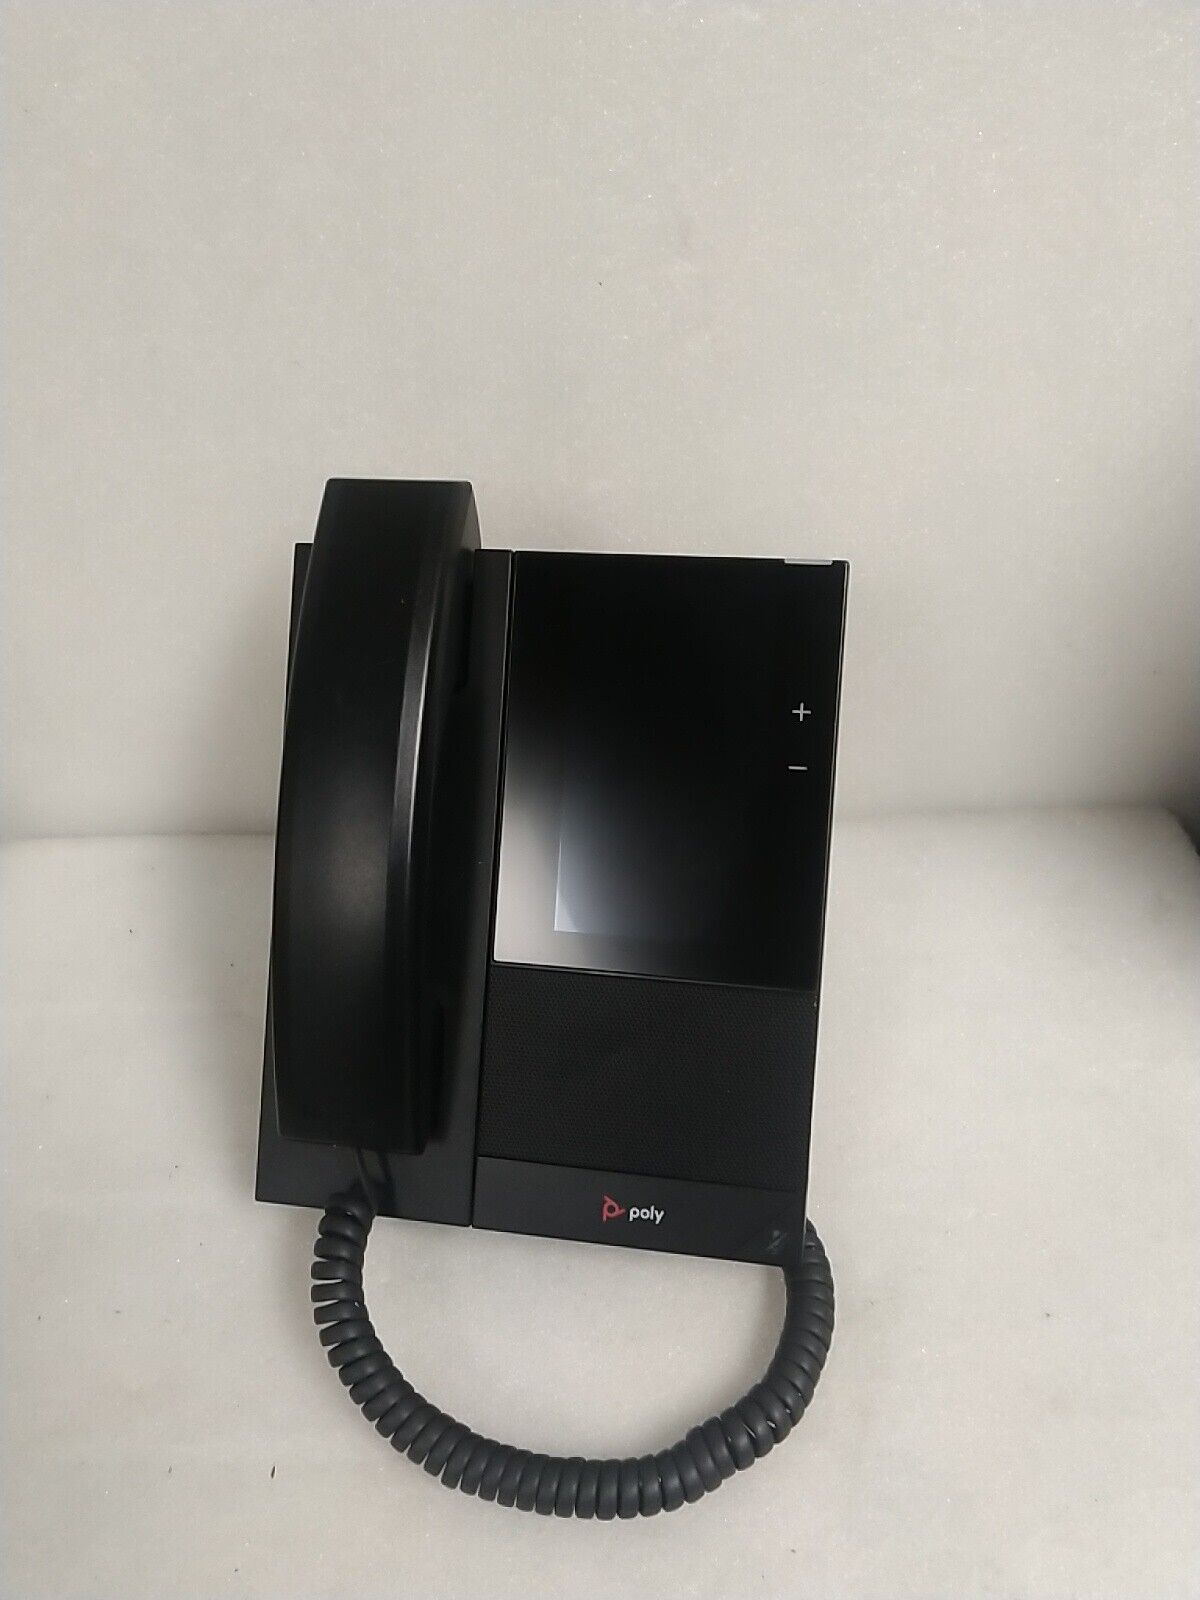 Poly CCX 500 Buisness VoIP Phone